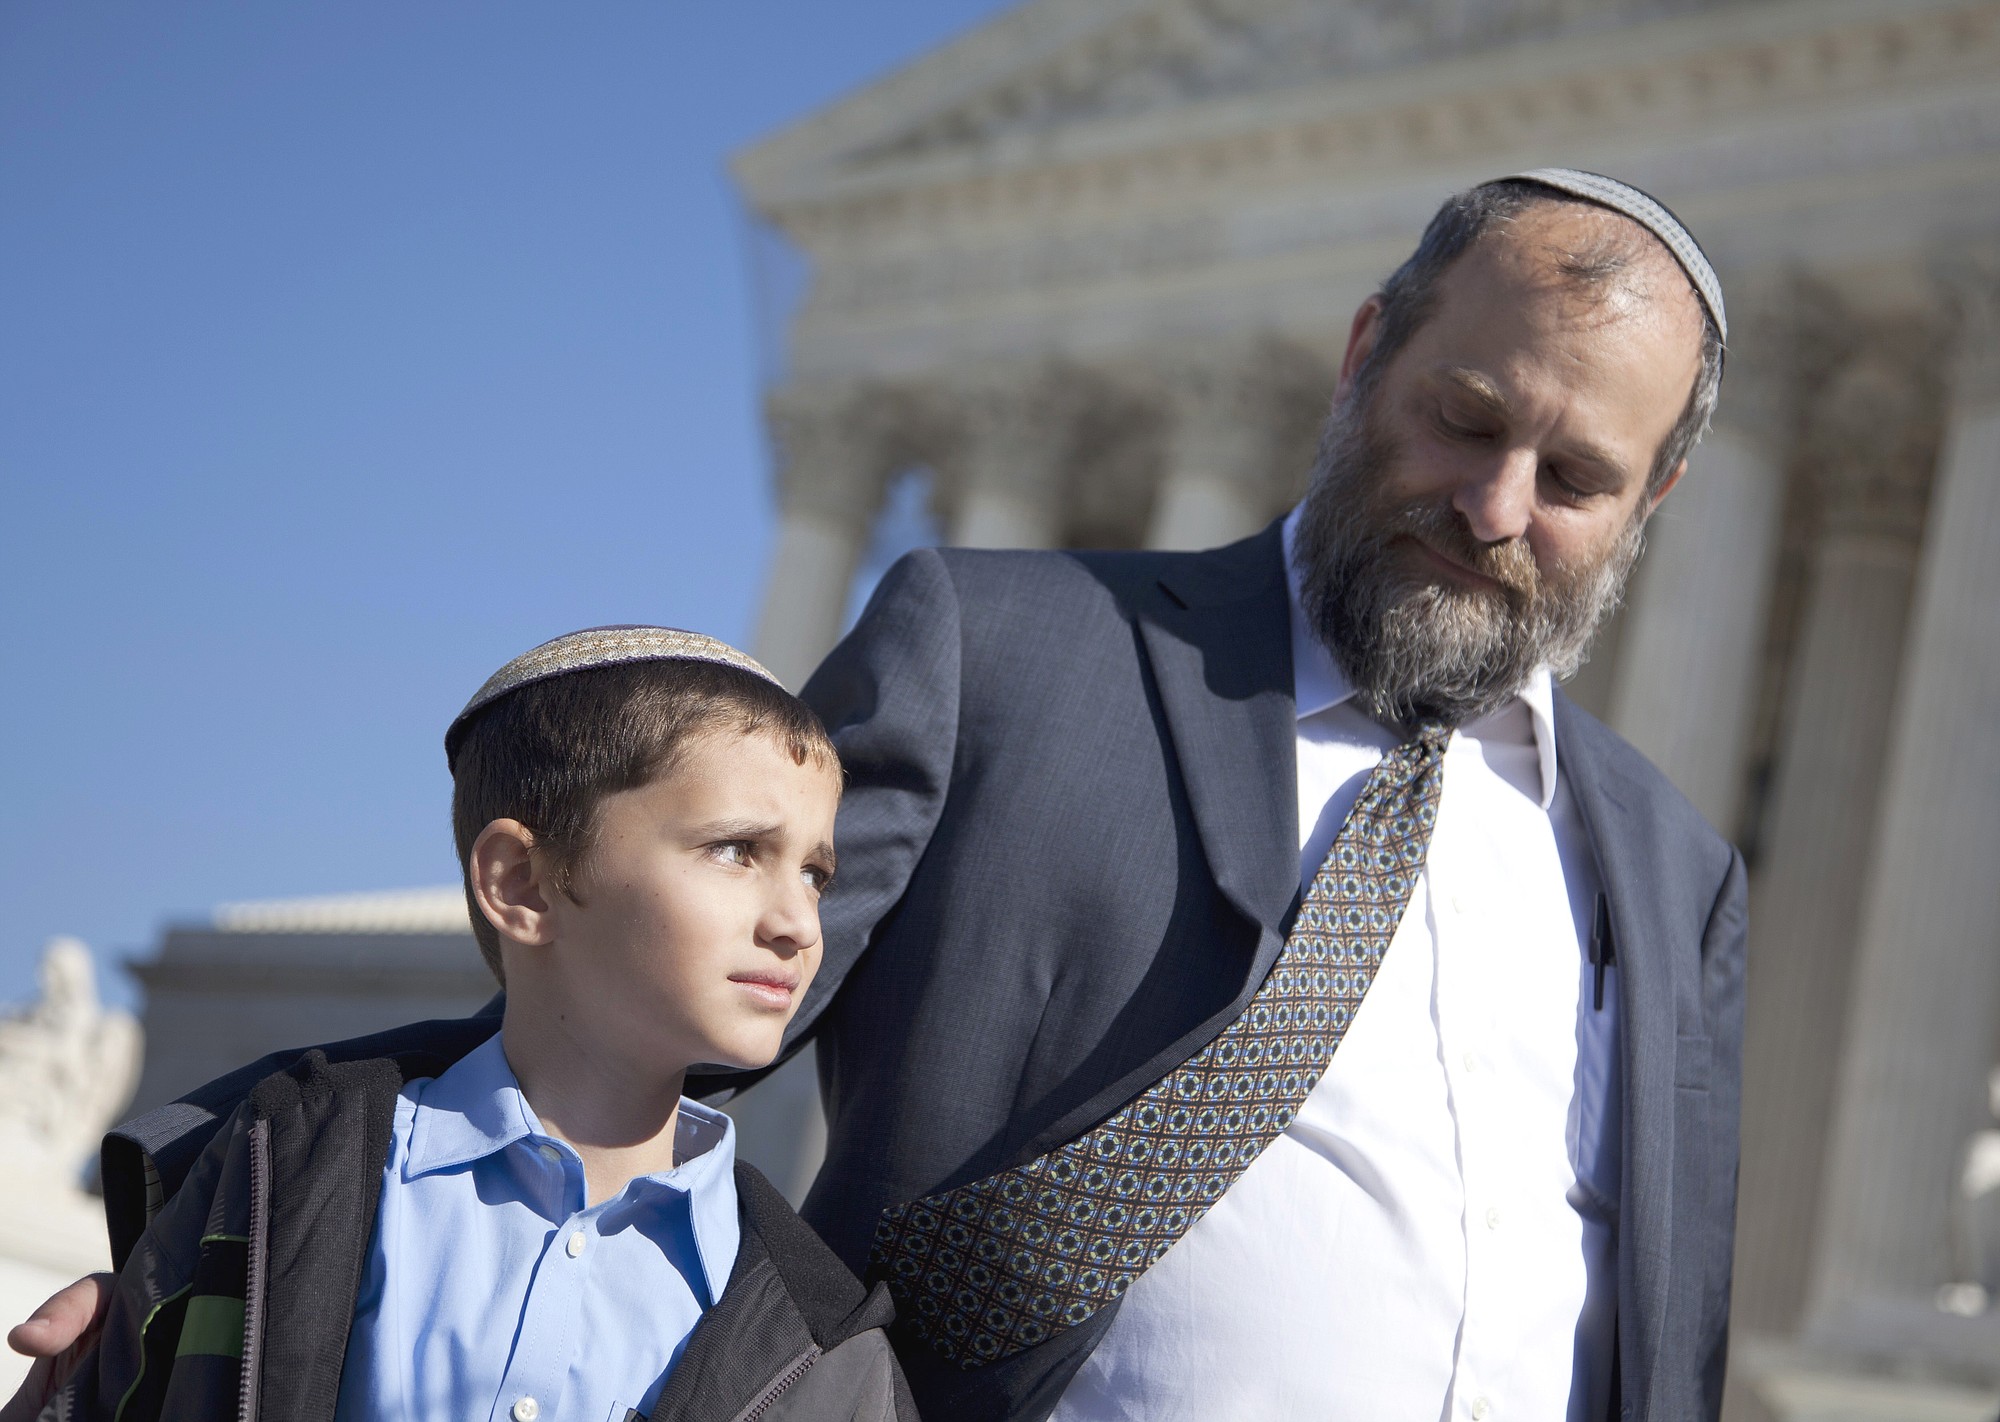 Ari Zivotofsky, right, stands with his 9-year-old son, Menachem, outside the Supreme Court in Washington in 2011. The first time Menachem's case was in front of the Supreme Court, Justice Stephen Breyer laid out several reasons why courts should stay out of a dispute between Congress and the president over whether Americans born in Jerusalem may list their place of birth on their passports as Israel.